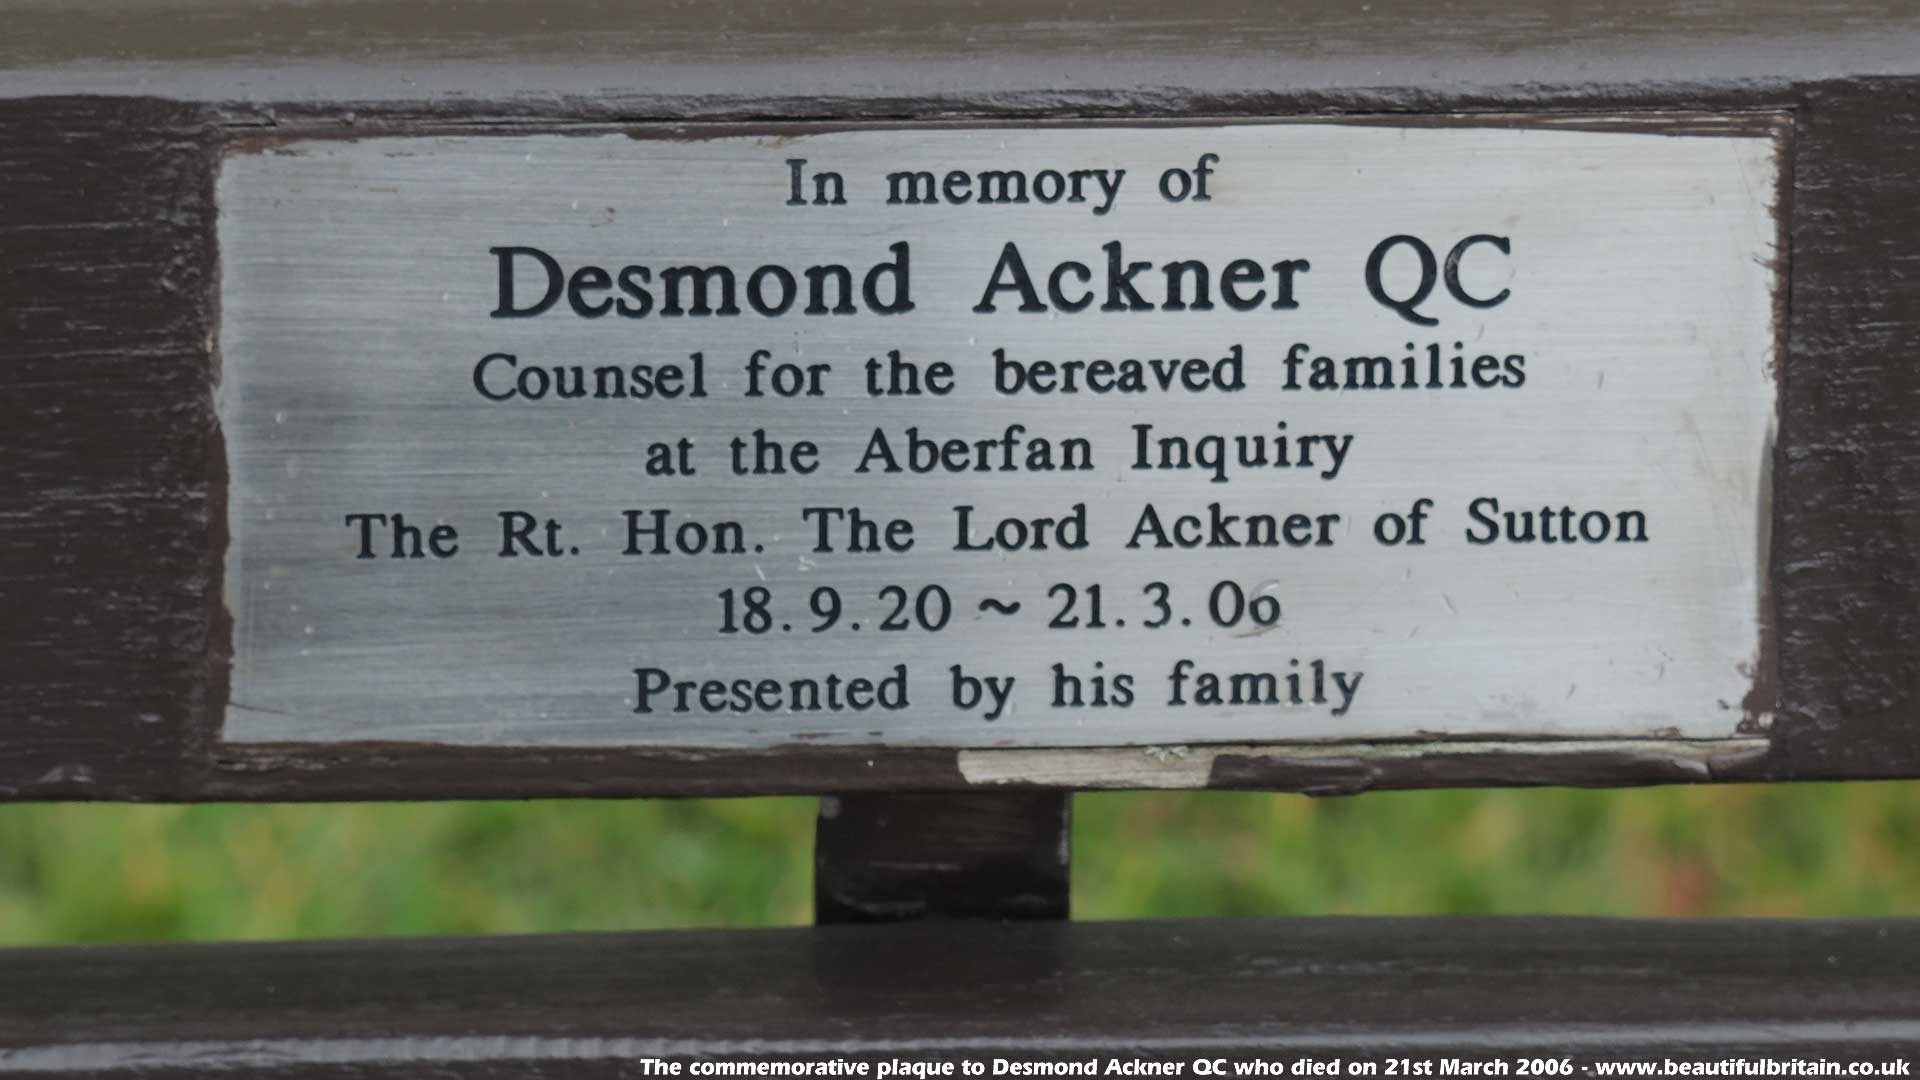 The plaque to Desmond Ackner, counsel for the bereaved families in the Aberfan inquiry